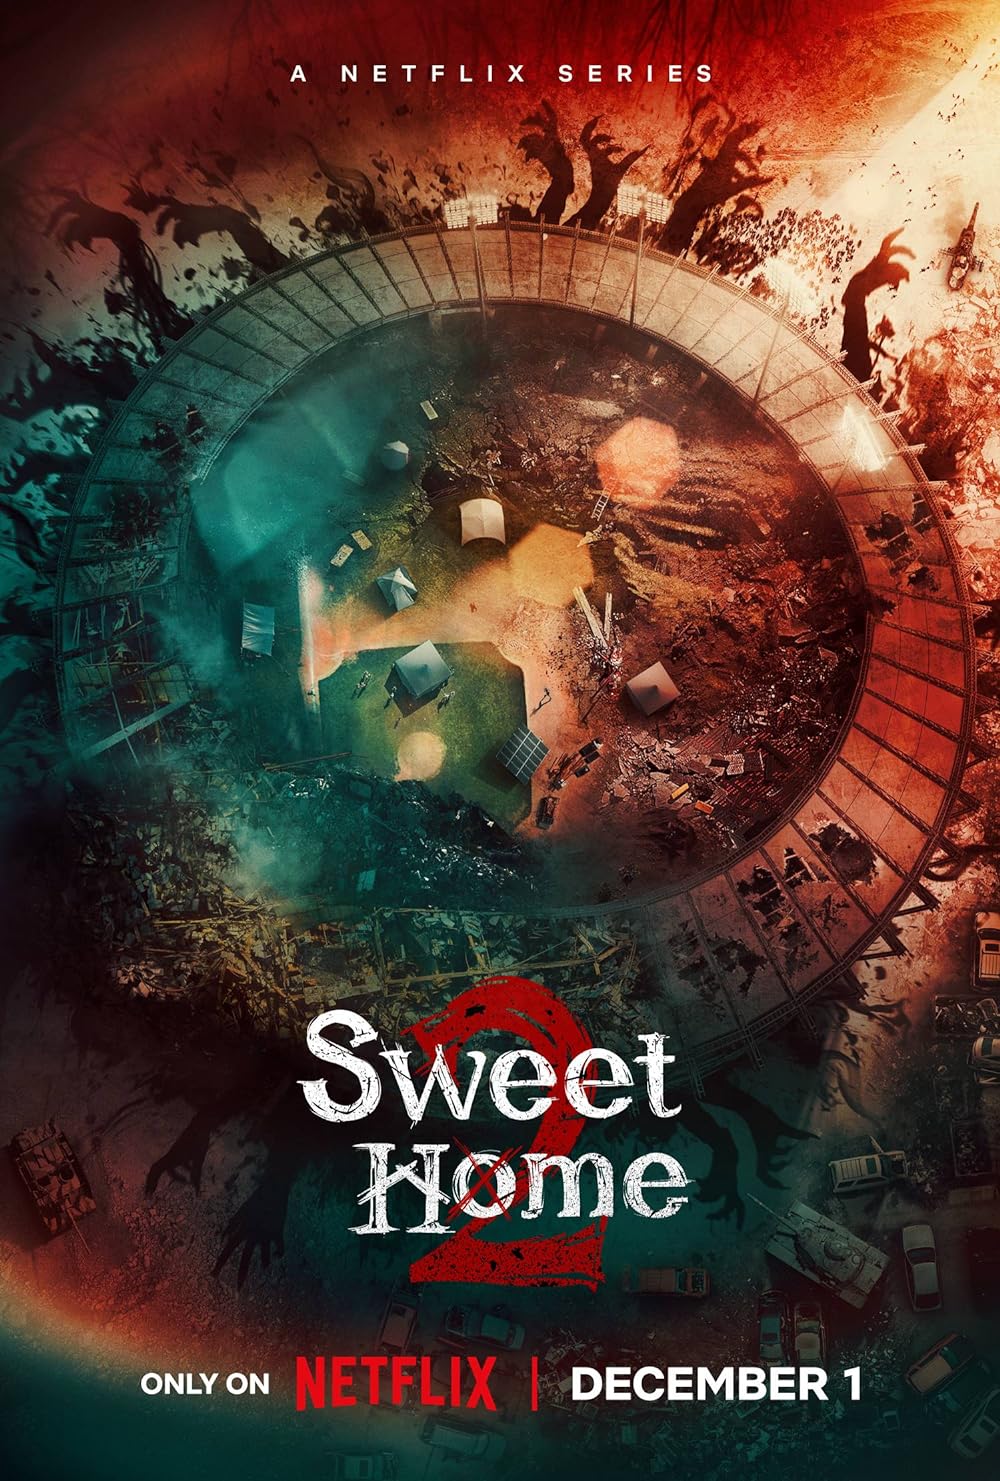 Sweet Home Season 2 (December 1) -  NetflixFans of spine-chilling horror are in for a treat as 